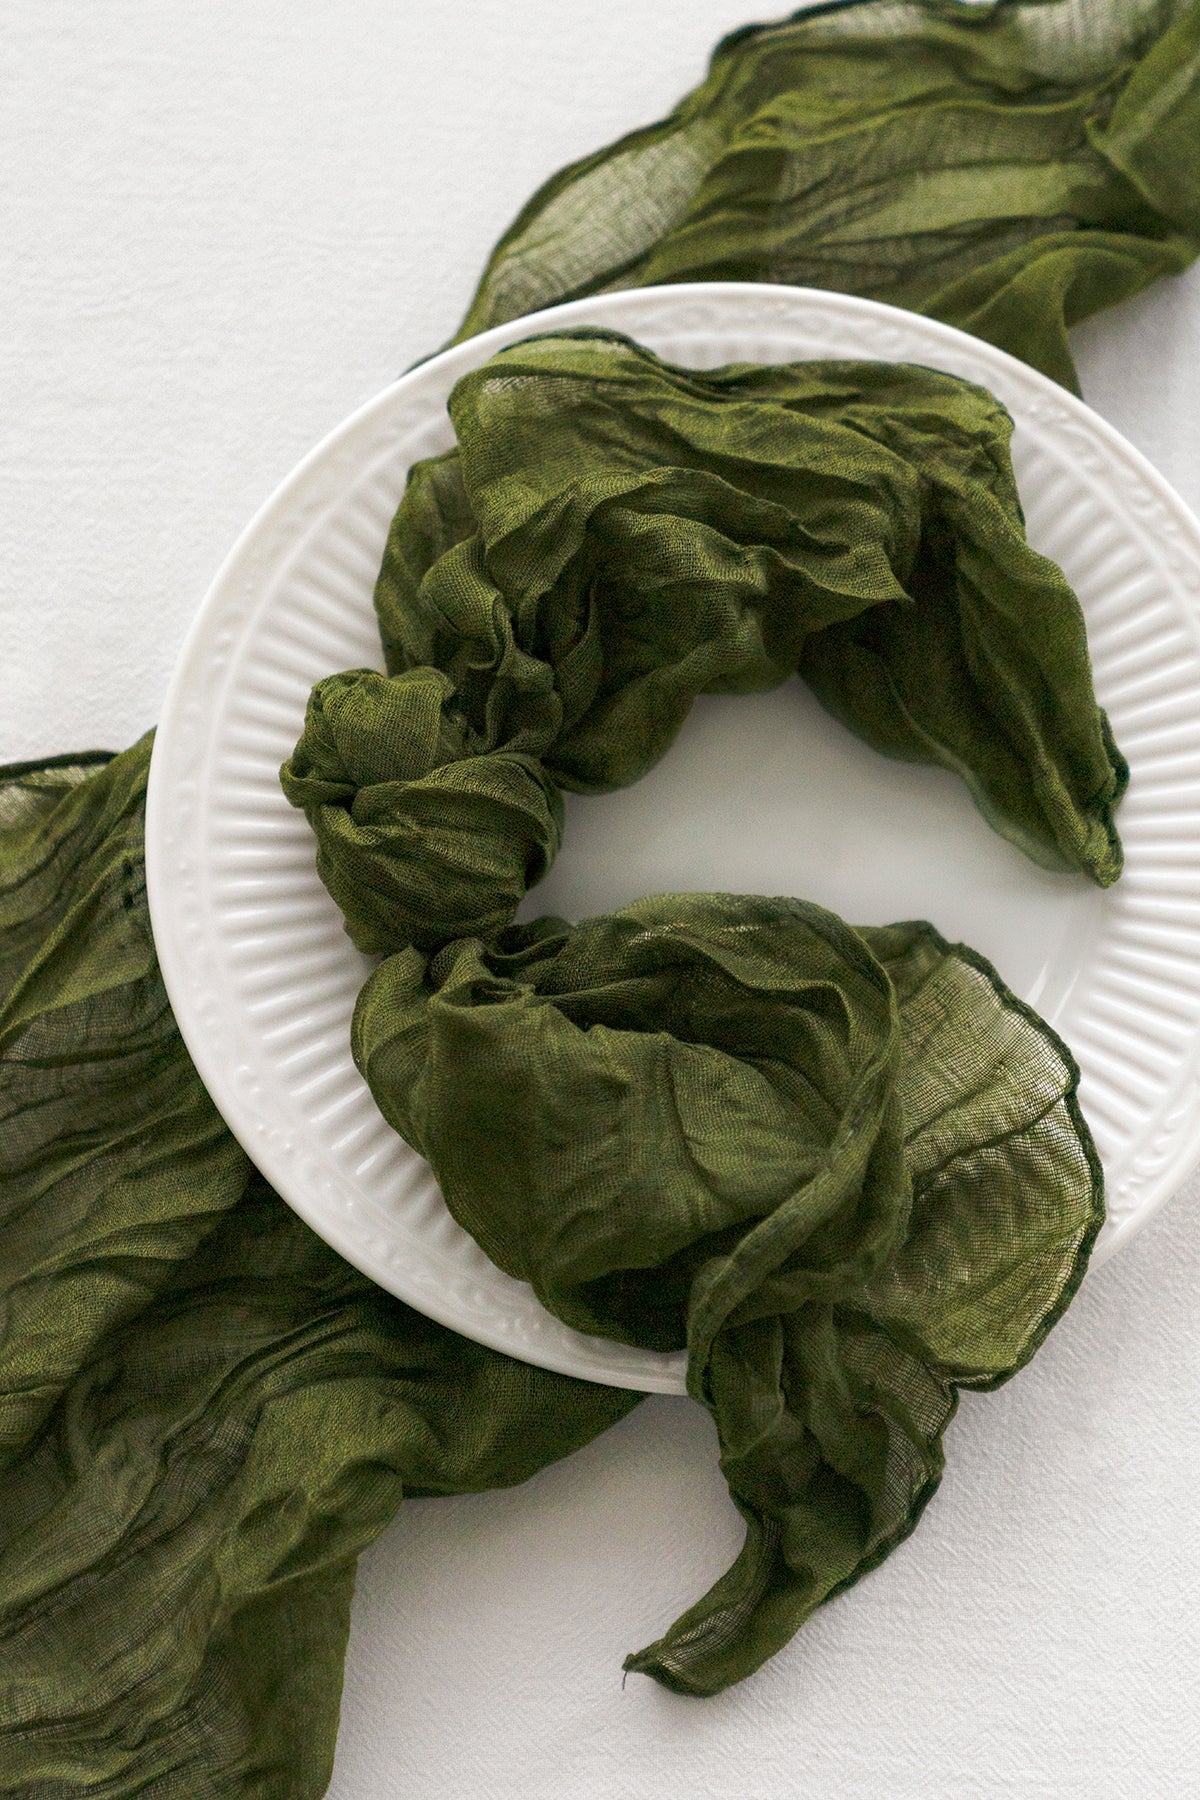 Cheesecloth Napkin & Table Runner Set in Moss Green